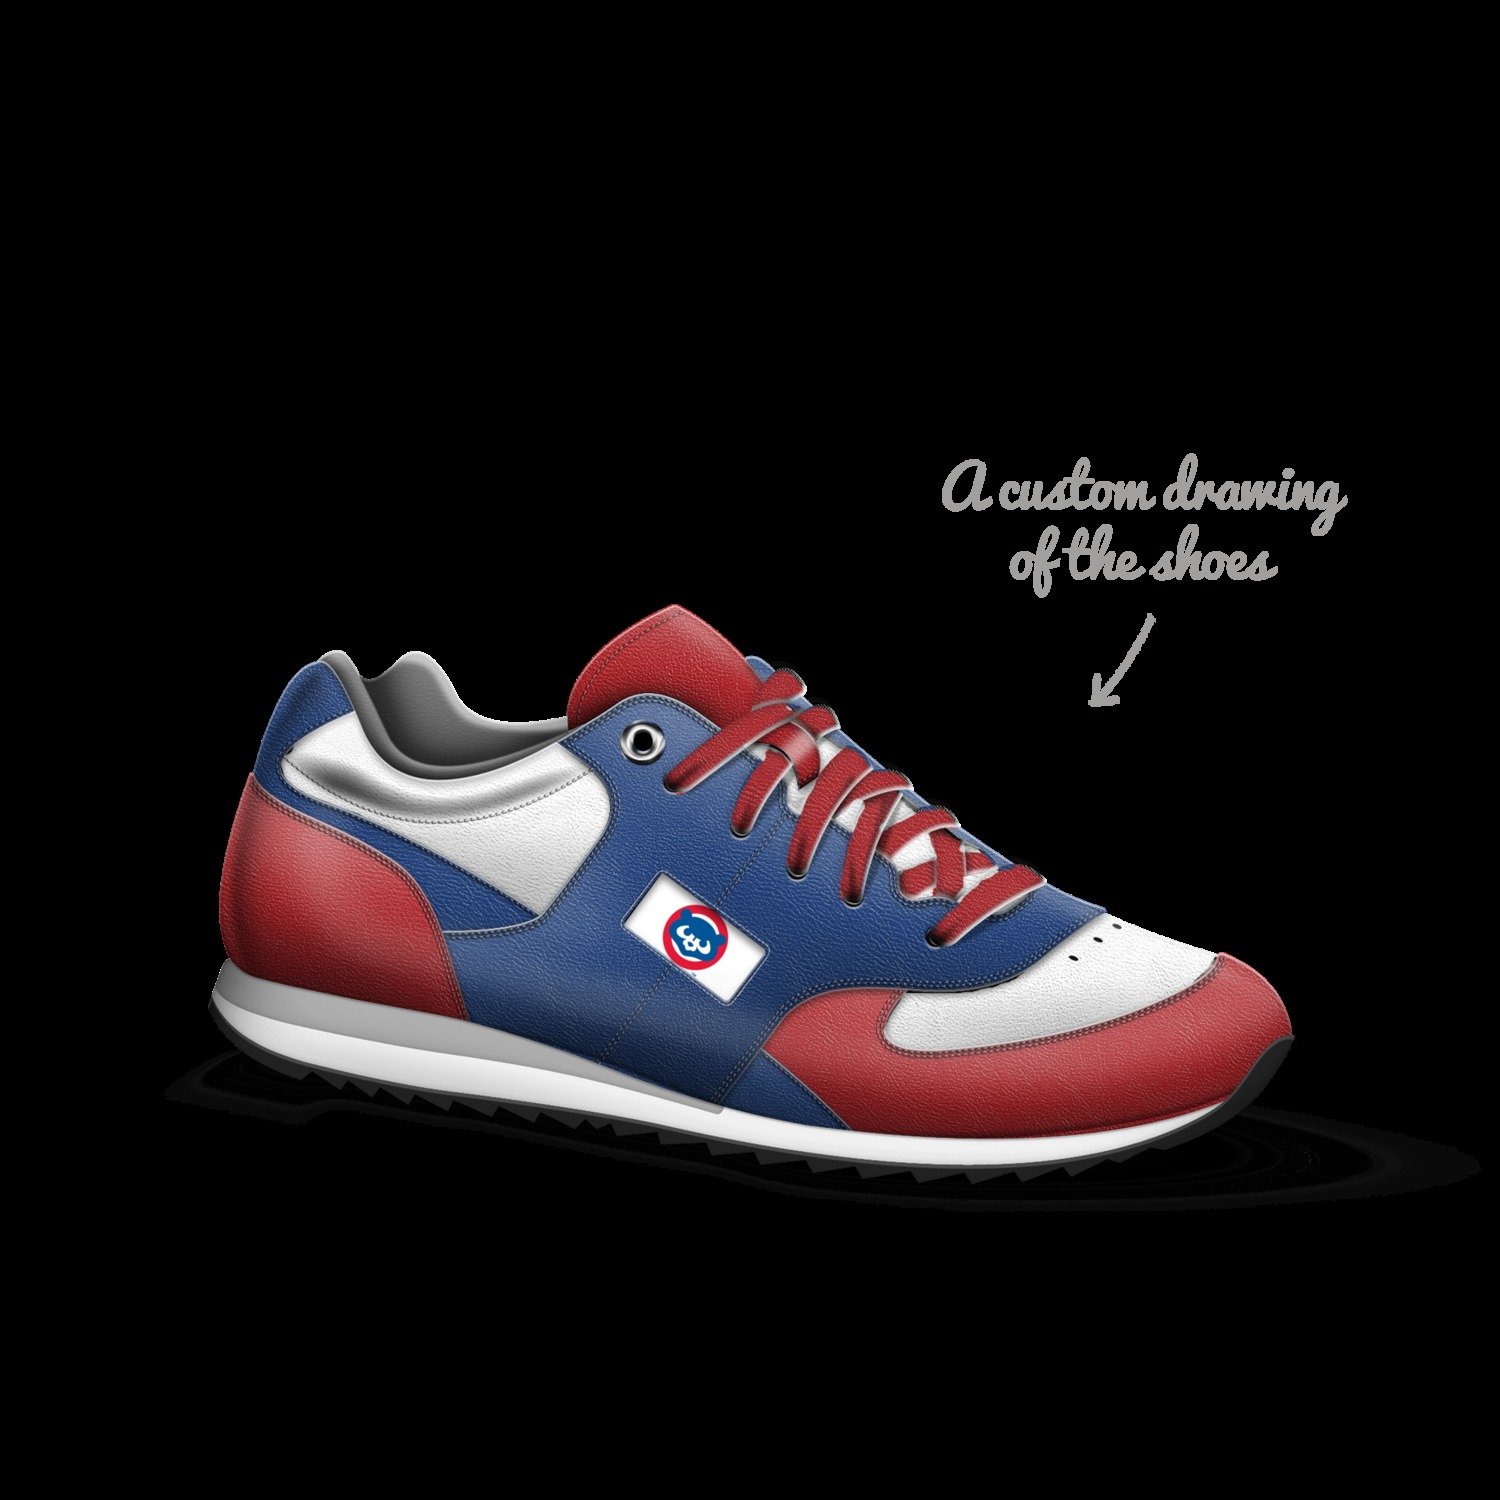 A Custom Shoe concept by David Lawrence